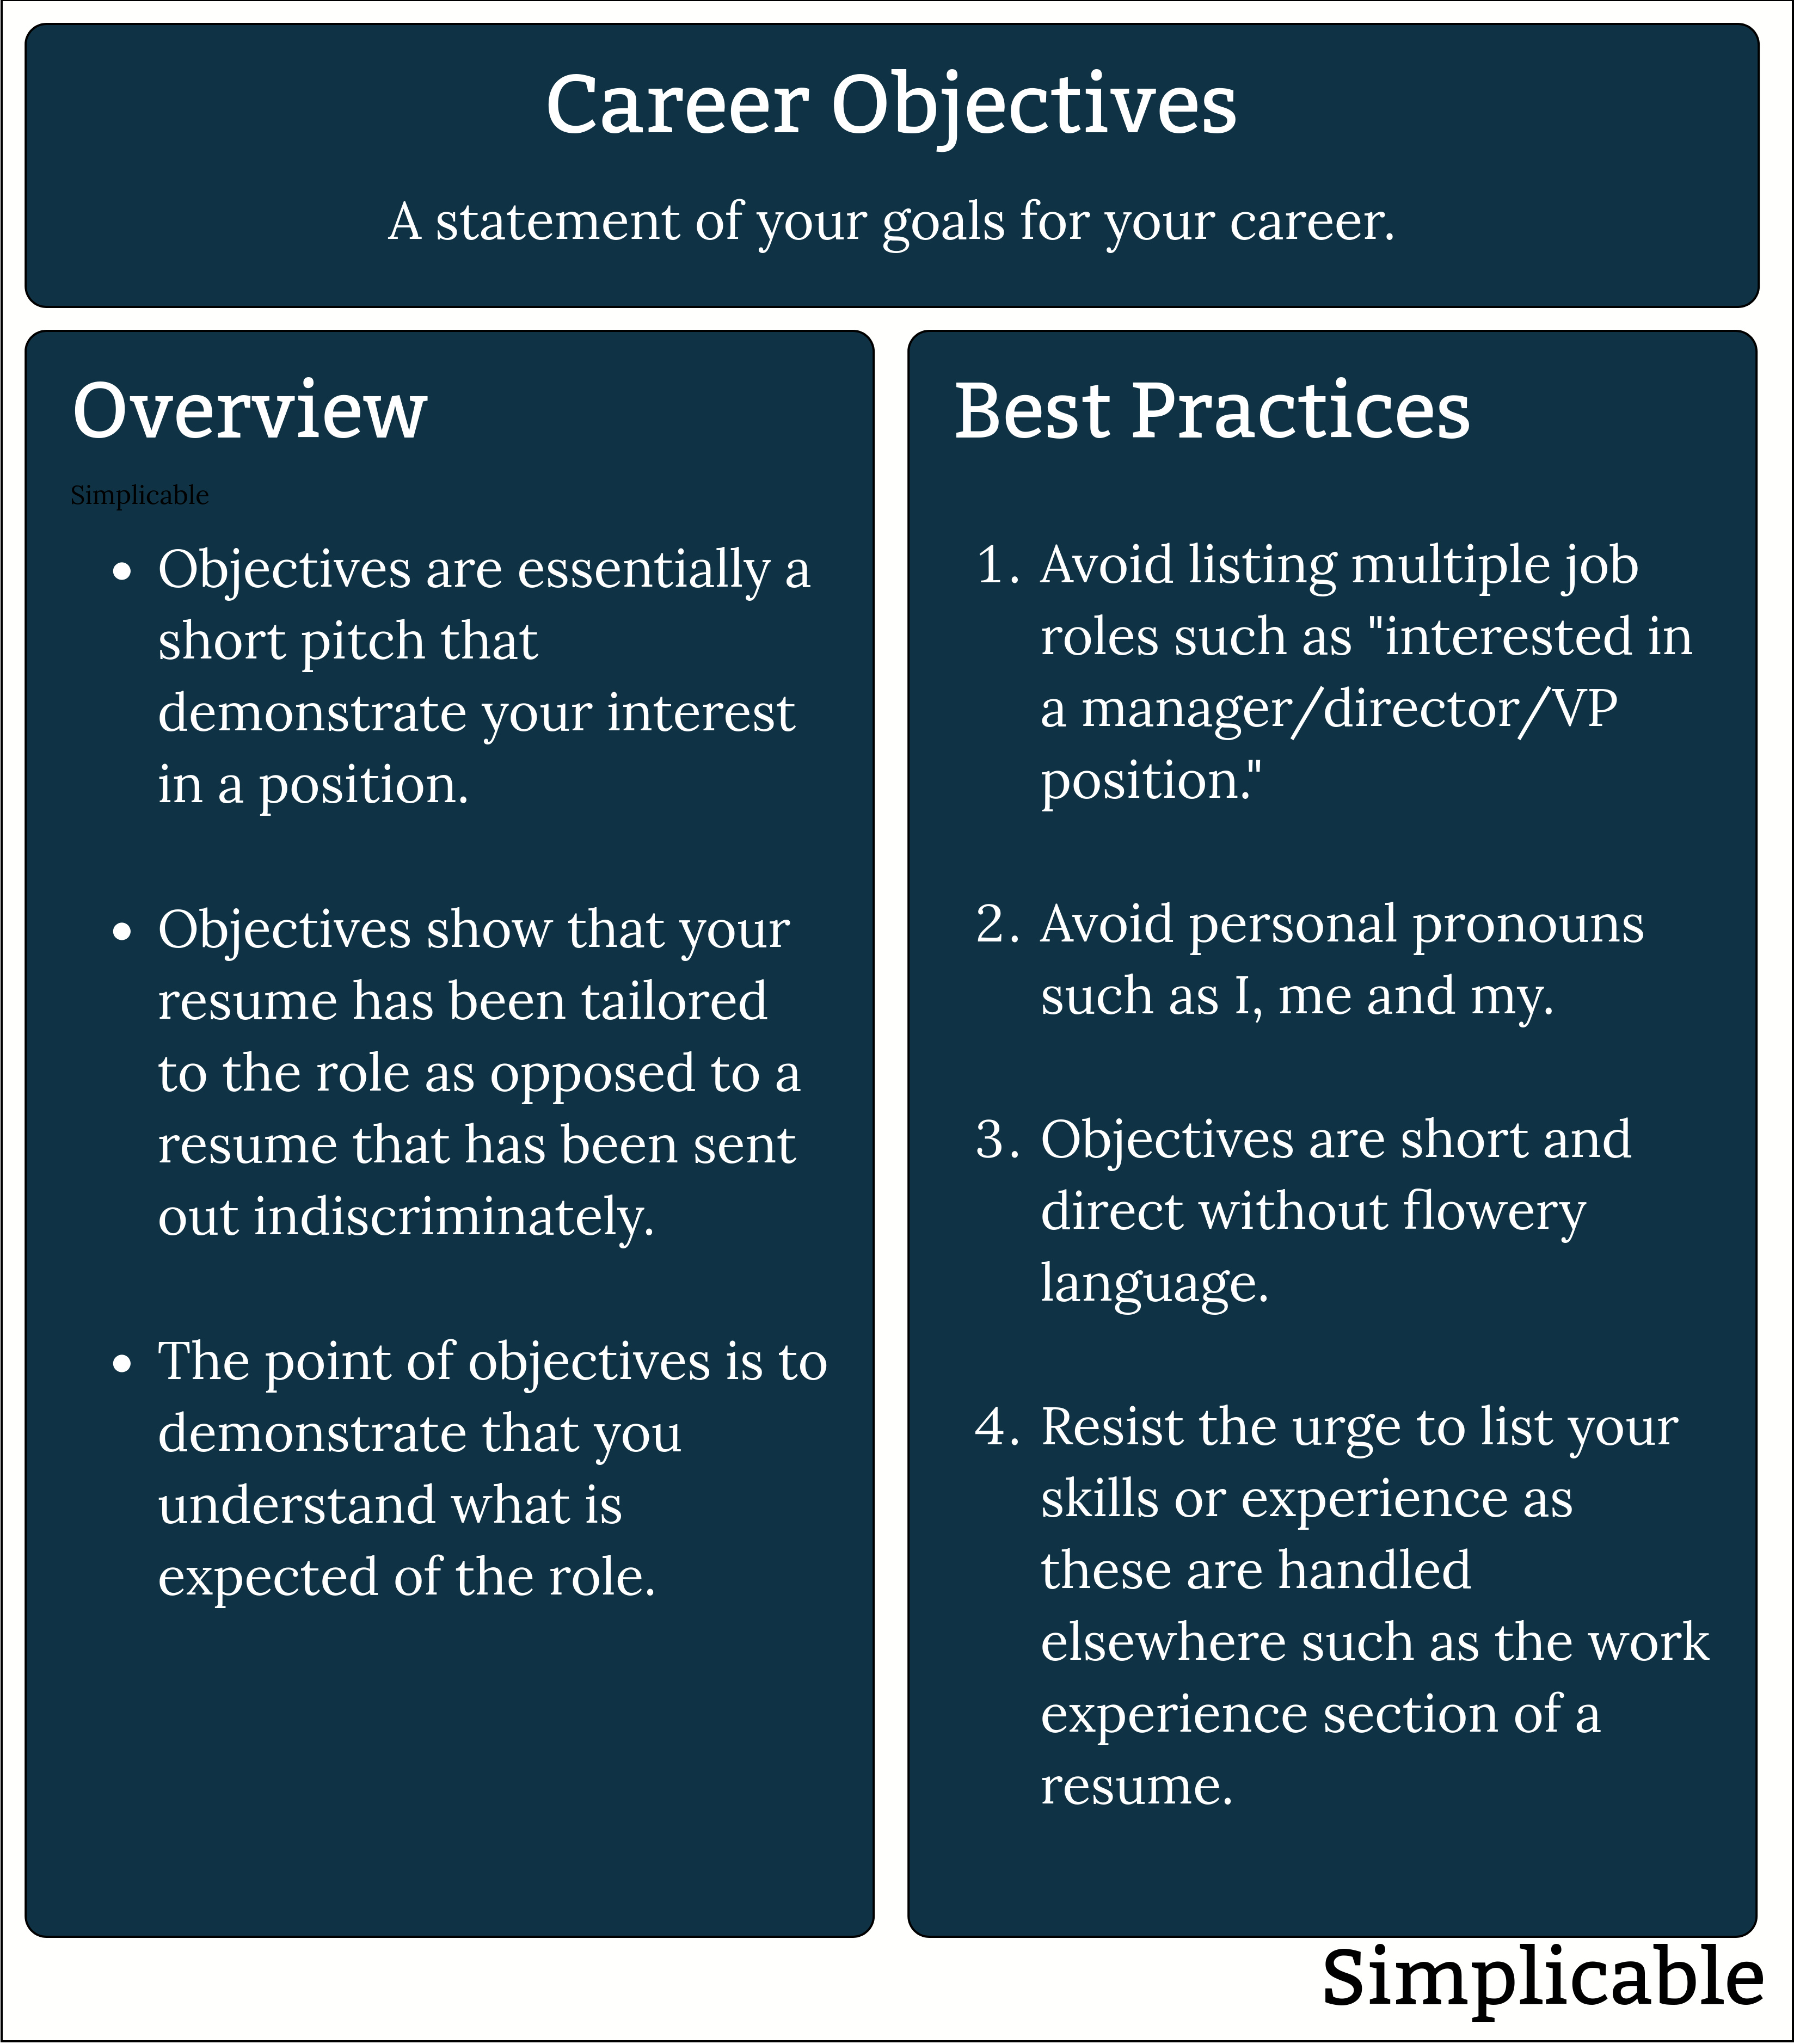 career objectives overview and best practices